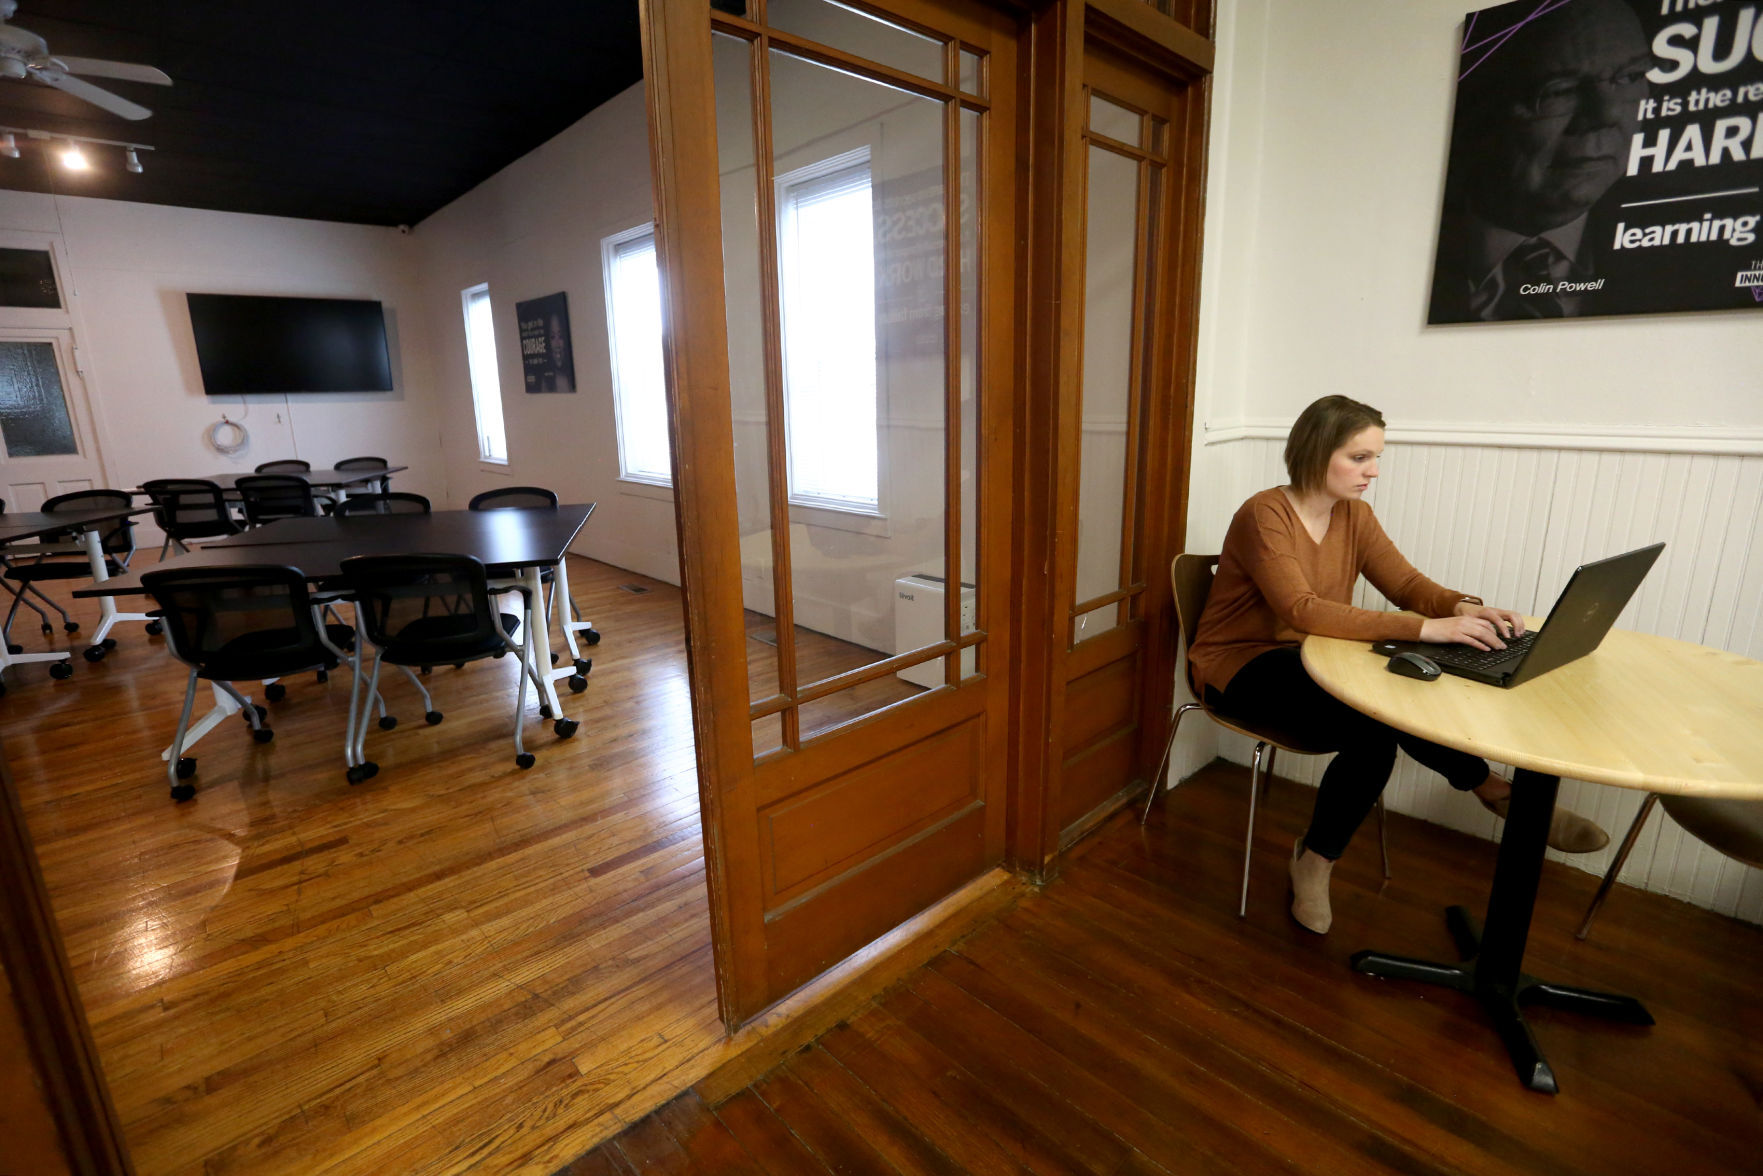 Katelyn Wolfe, with the Cascade Area Chamber of Commerce, works at The Innovation Lab in Cascade, Iowa, on Tuesday. PHOTO CREDIT: JESSICA REILLY